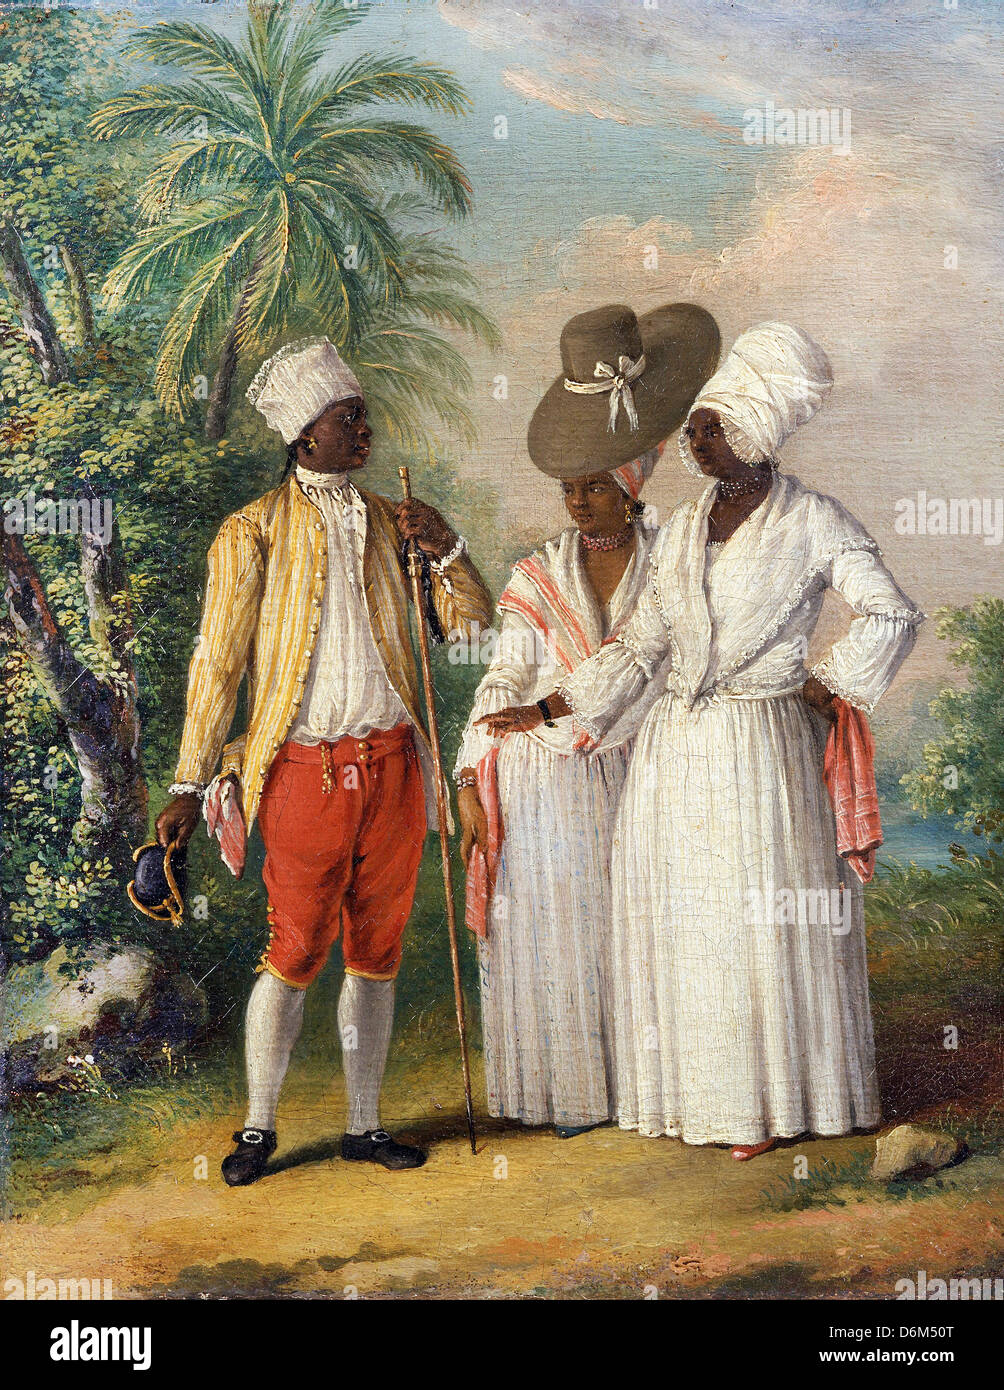 Agostino Brunias, Free West Indian Dominicans 1770 Oil on canvas. Yale Center for British Art, New Haven, Connecticut, USA Stock Photo